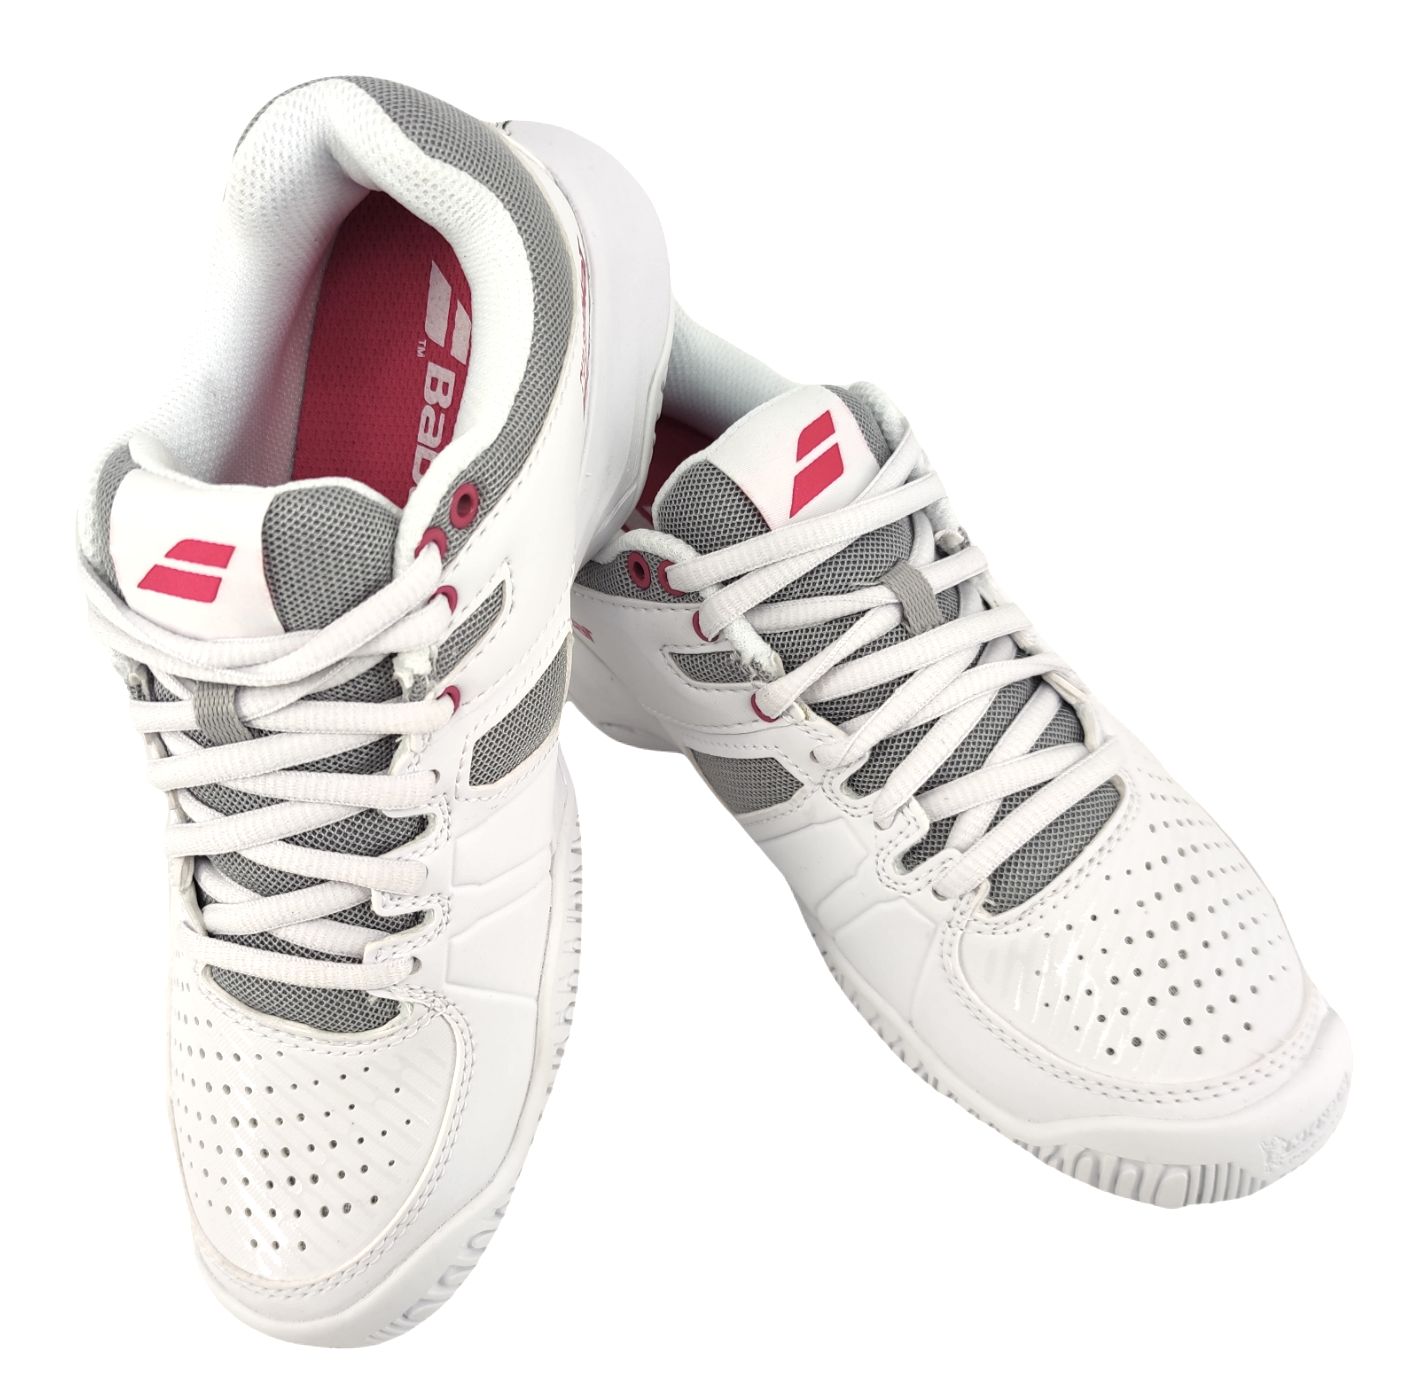 Women's Pulsion All Court Tennis Shoes White 